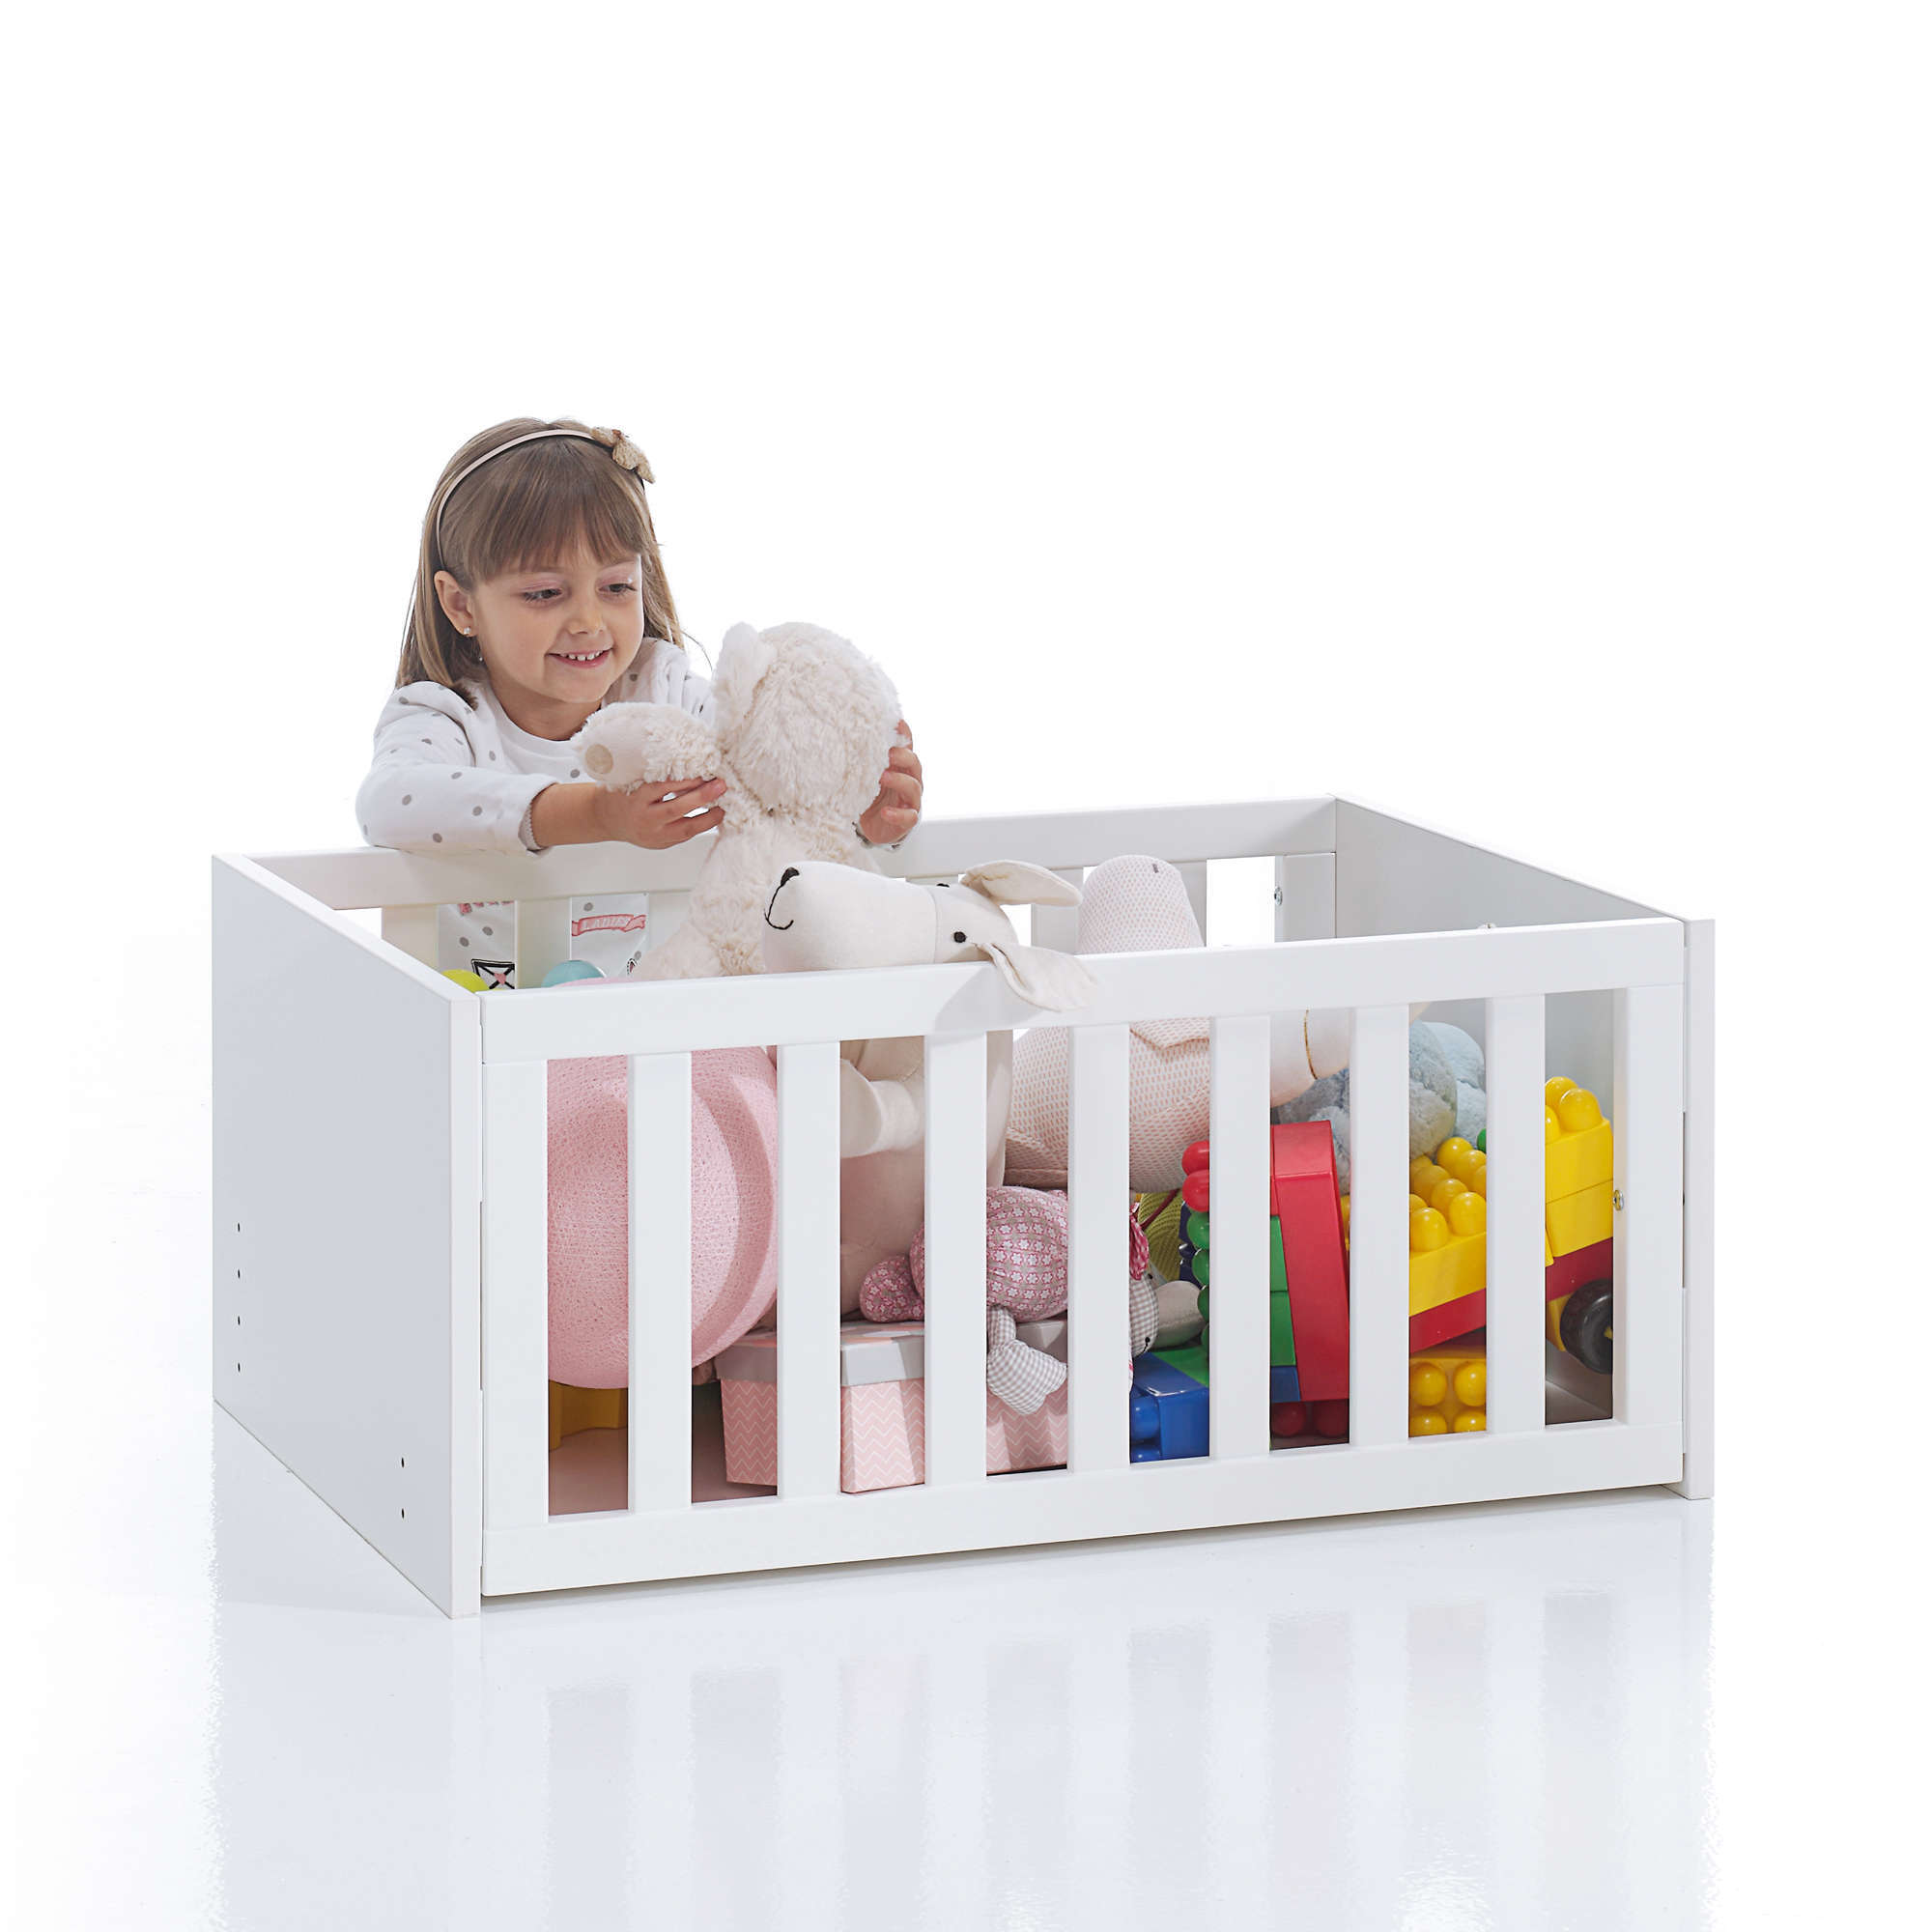 Co-sleeping crib Equo 5in1 Alondra stage toy box